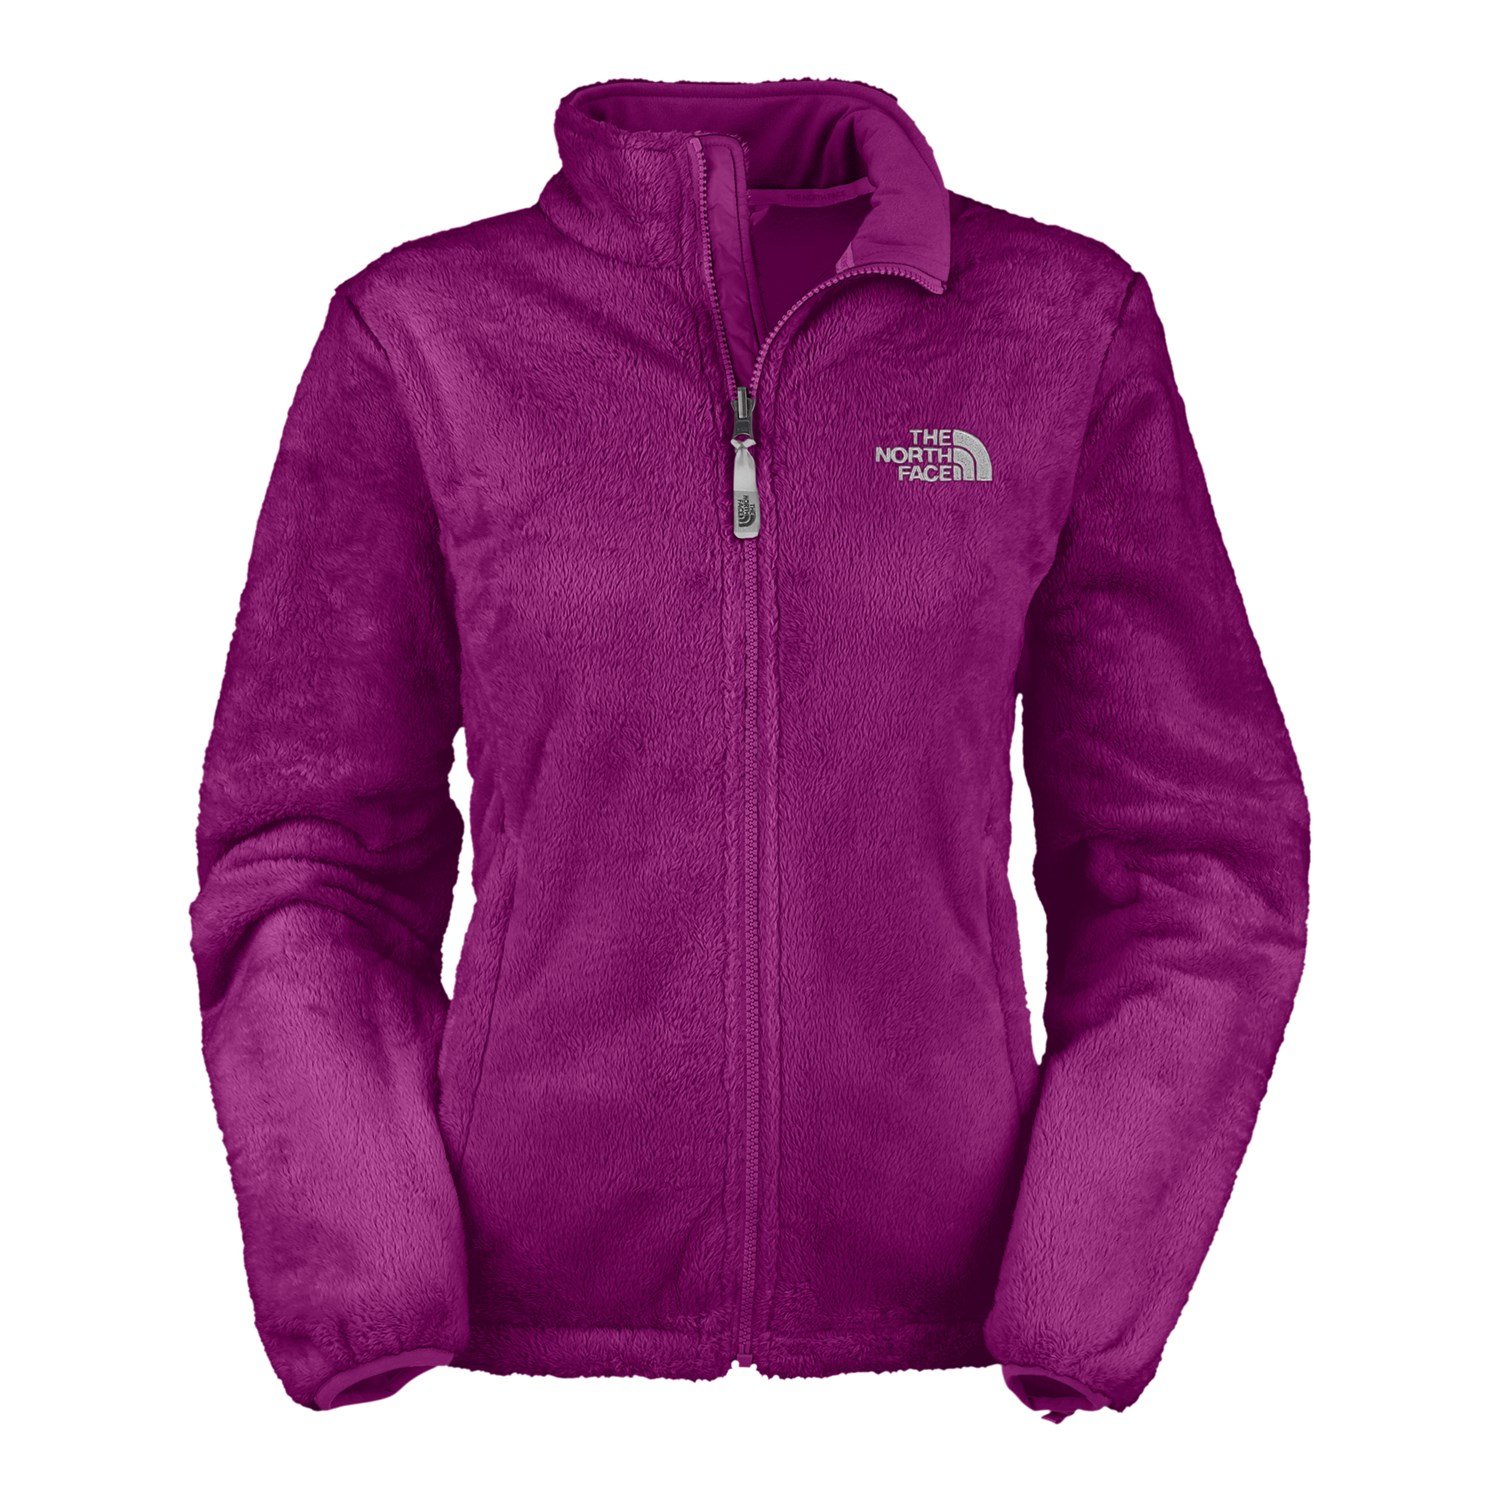 https://images.evo.com/imgp/zoom/48859/292759/the-north-face-osito-jacket-women-s-.jpg